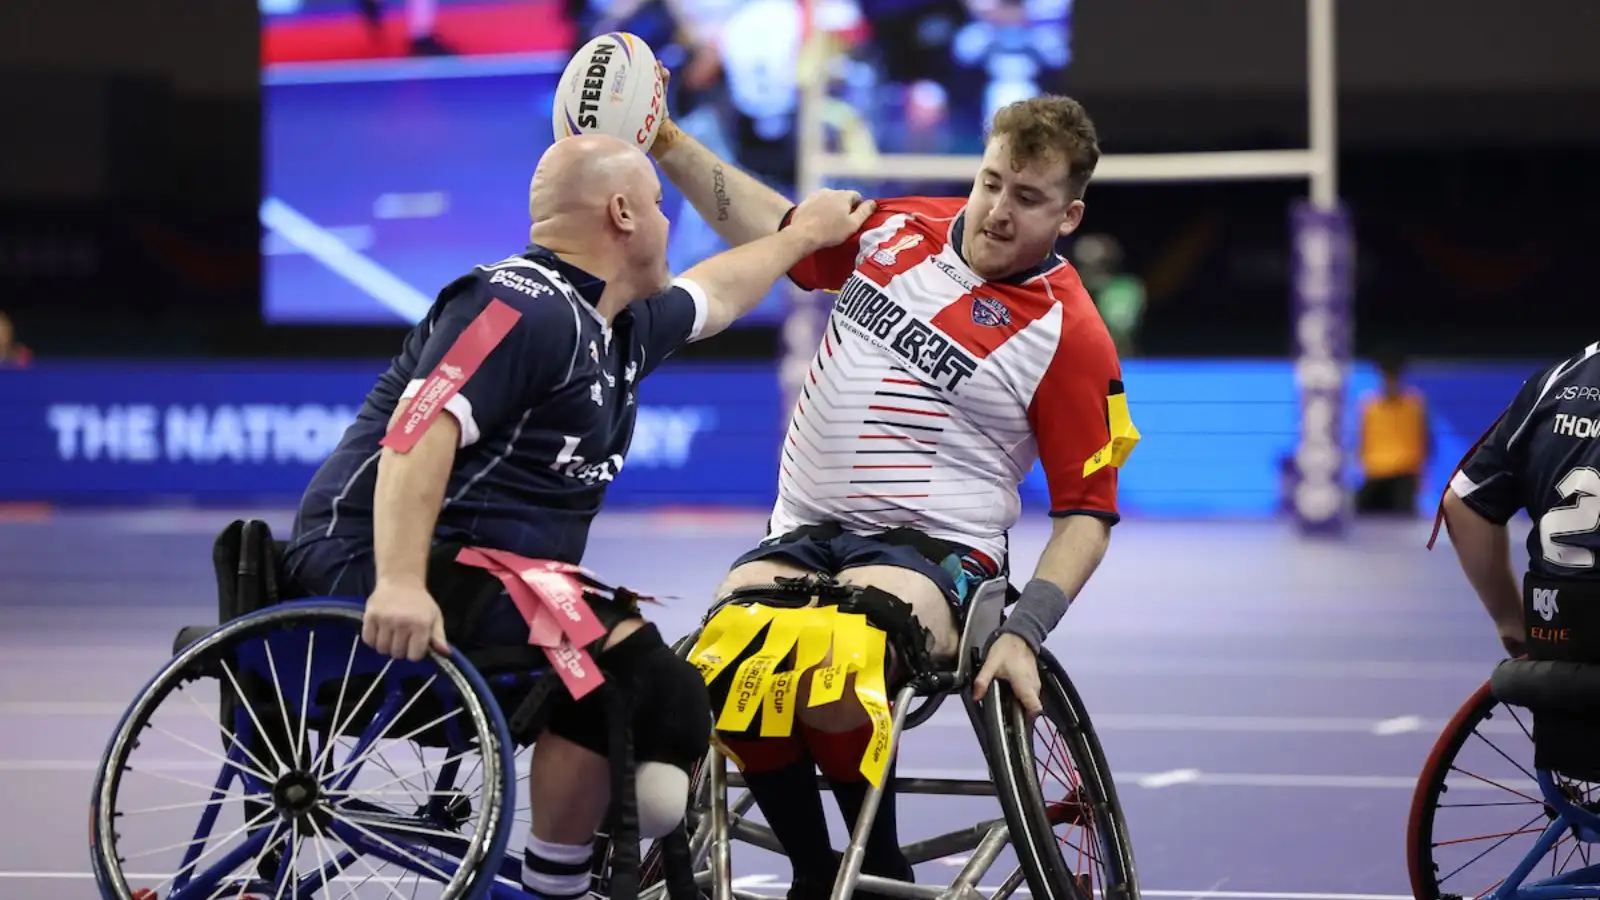 Wigan star says American athletes would ‘snap’ at opportunity to play wheelchair rugby league